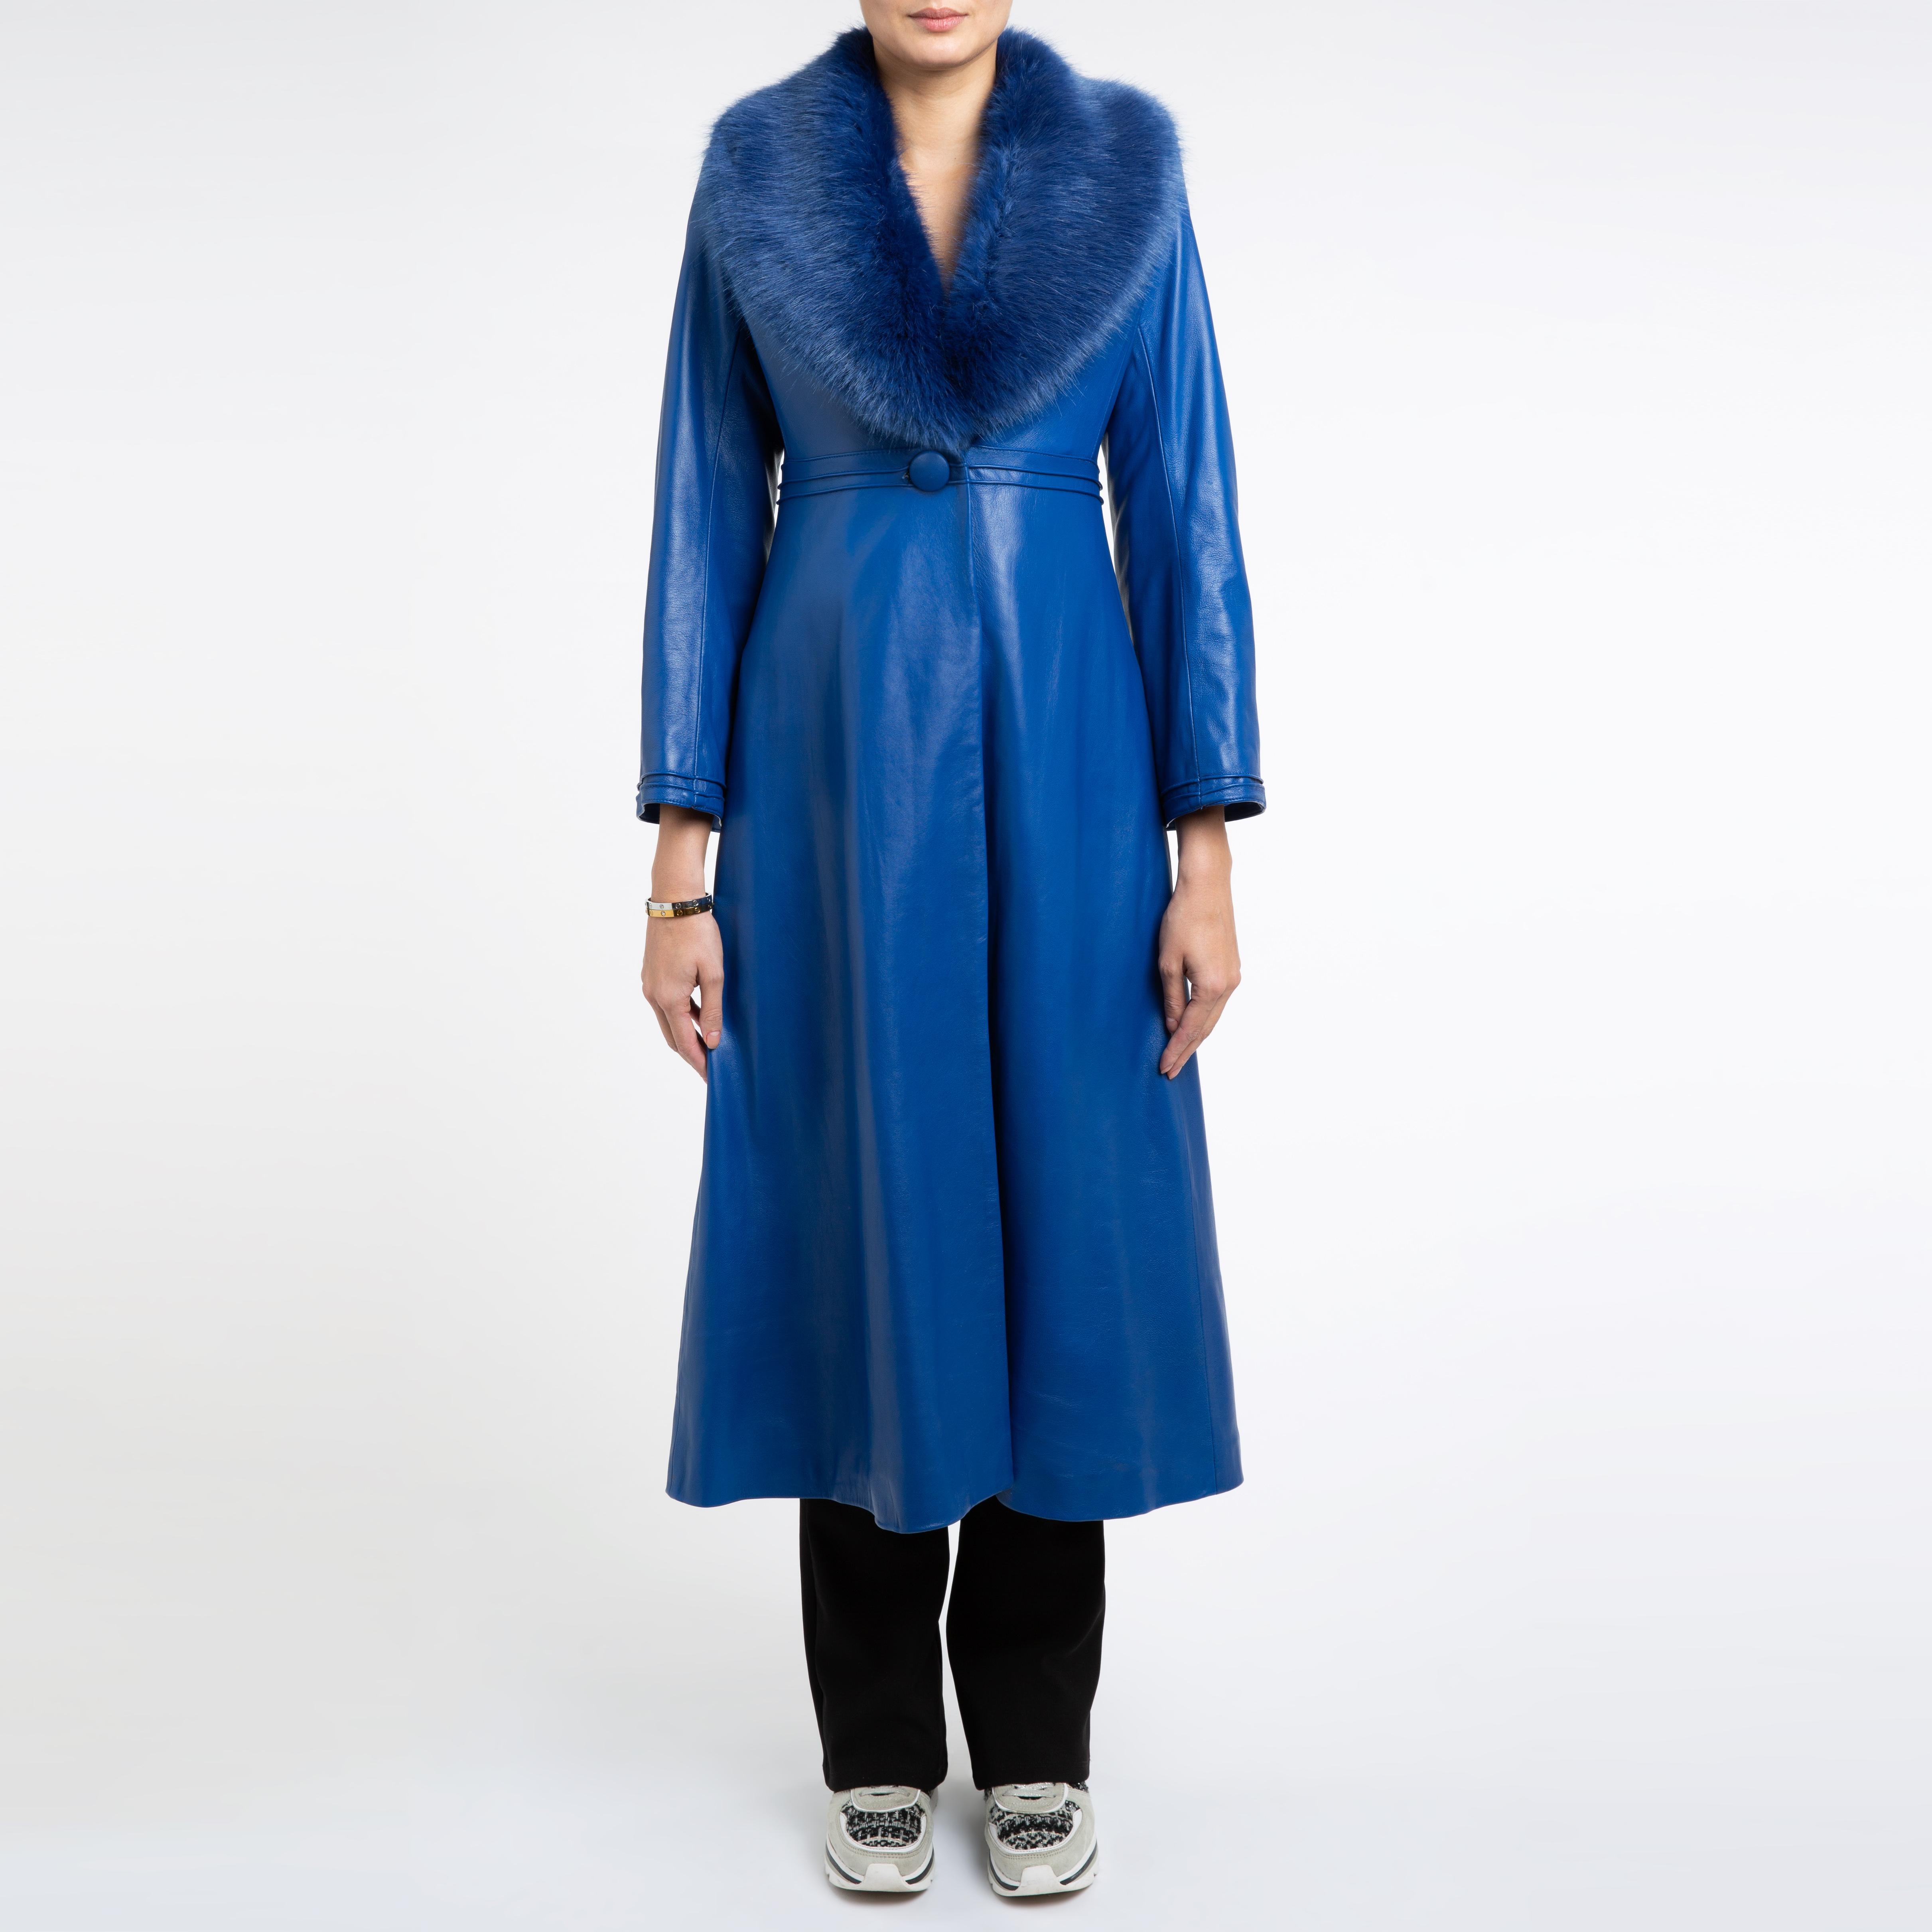 Verheyen London Edward Leather Coat in Blue with Faux Fur - Size uk 12

The Edward Leather Coat created by Verheyen London is a romantic design inspired by the 1970s and Edwardian Era of Fashion.  A timeless design to be be worn for a lifetime and